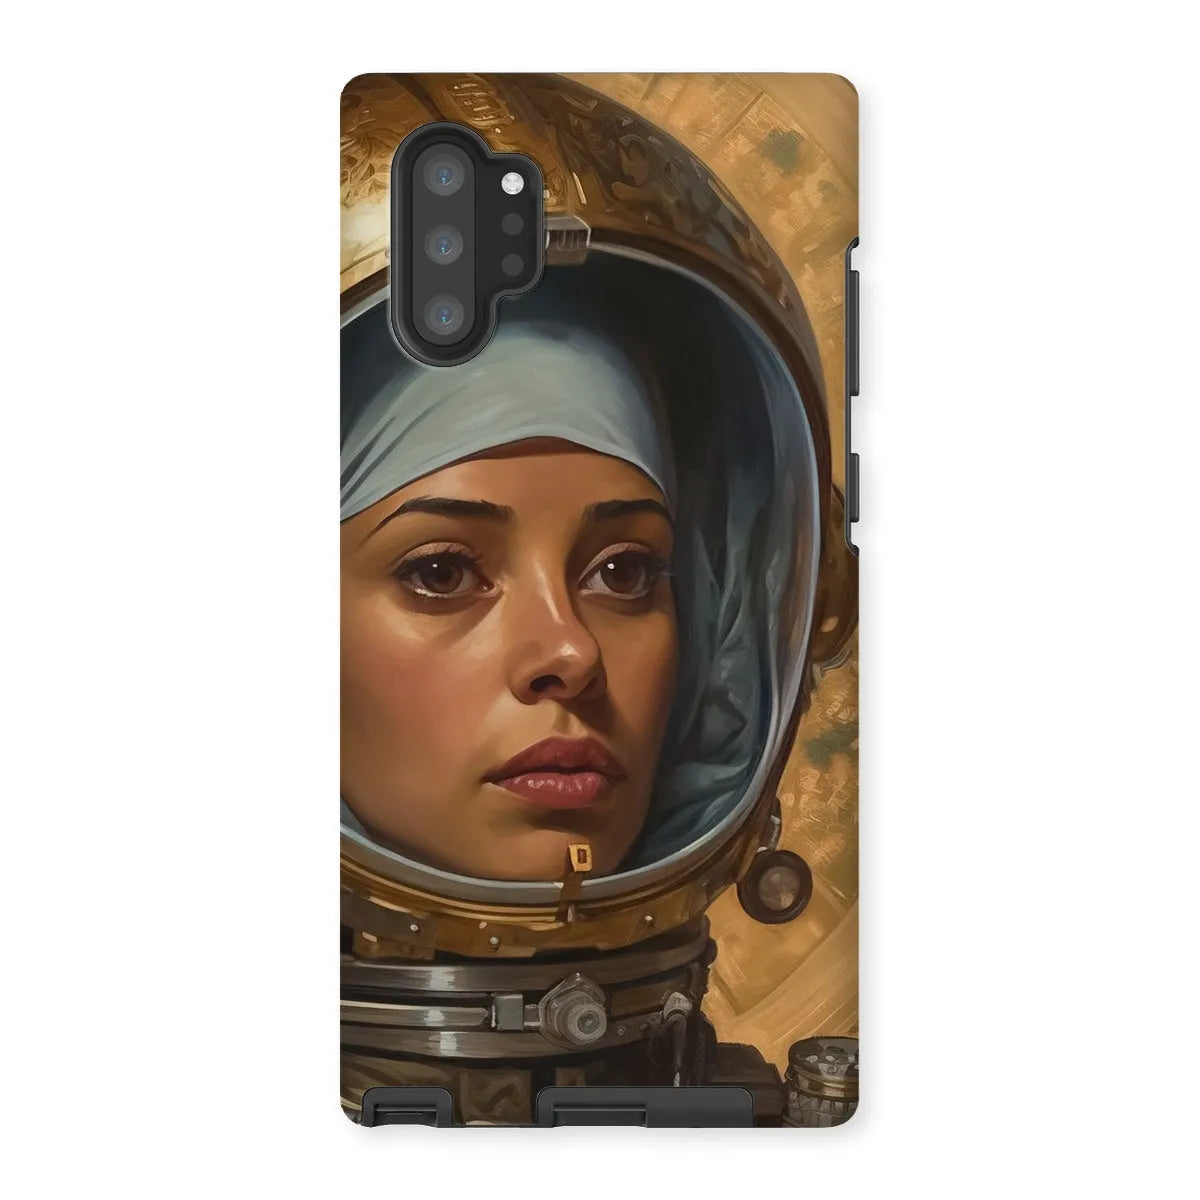 Amira The Lesbian Astronaut - Sapphic Aesthetic Phone Case - Samsung Galaxy Note 10p / Matte - Mobile Phone Cases